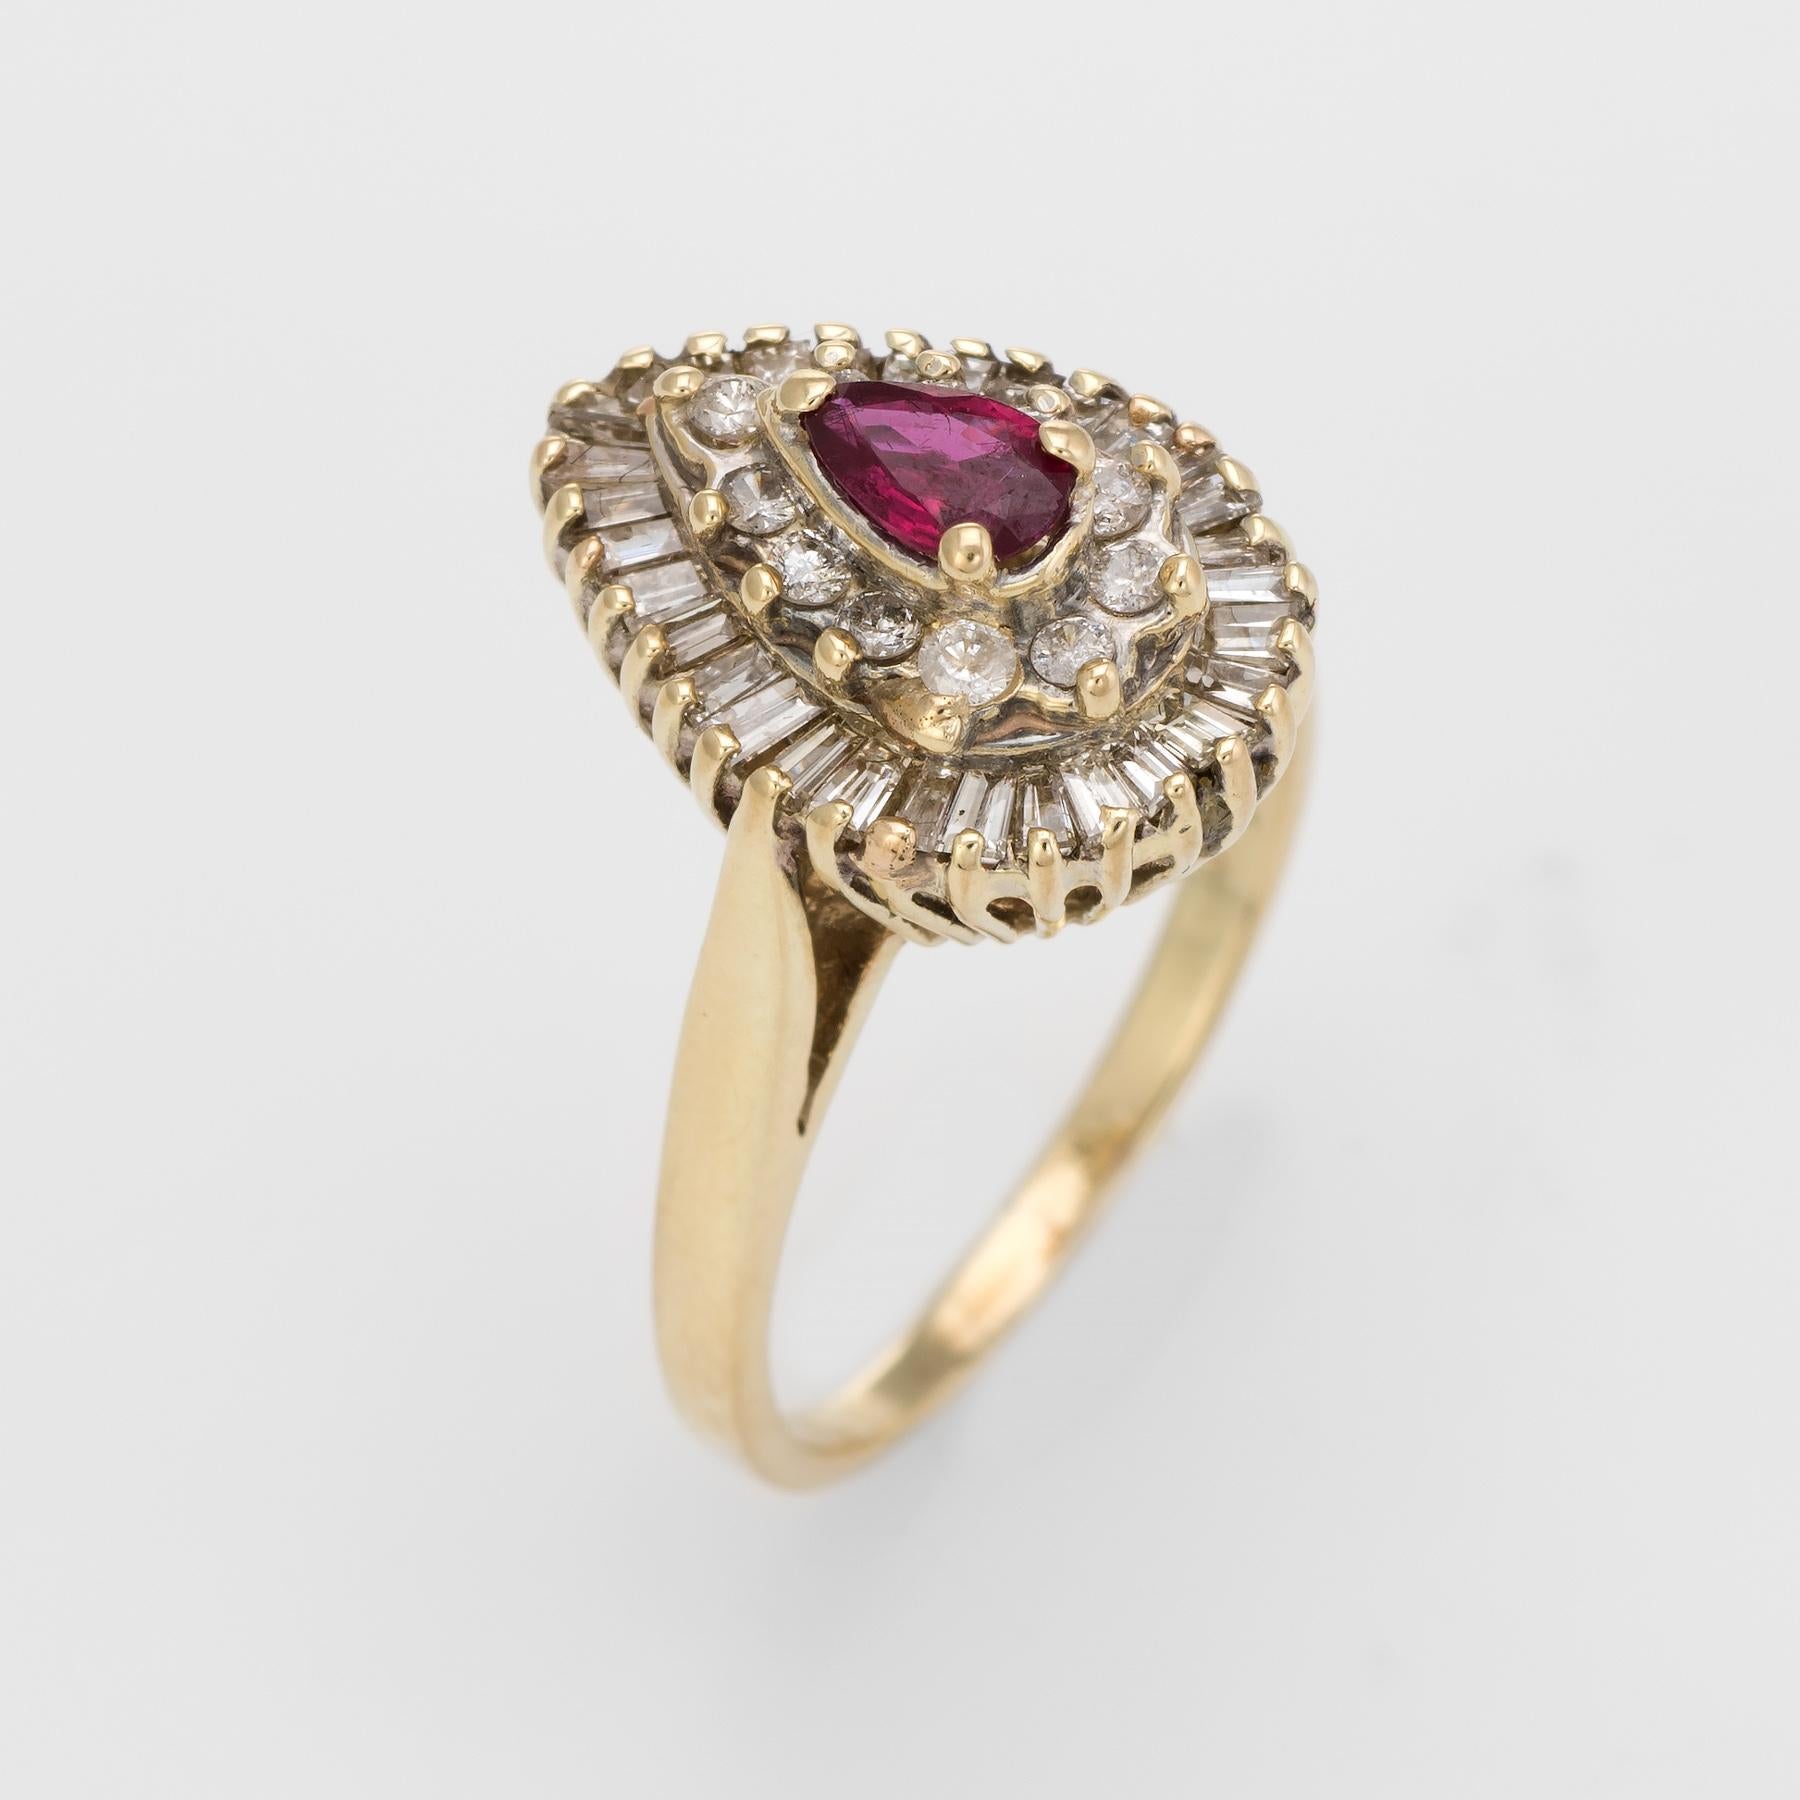 Nicely detailed vintage cluster cocktail ring set with a ruby & diamonds, crafted in 14 karat yellow gold. 

Faceted pear cut ruby measures 5.5mm x 3.5mm (estimated at 0.30 carats), accented with 11 estimated 0.01 carat round brilliant cut diamonds